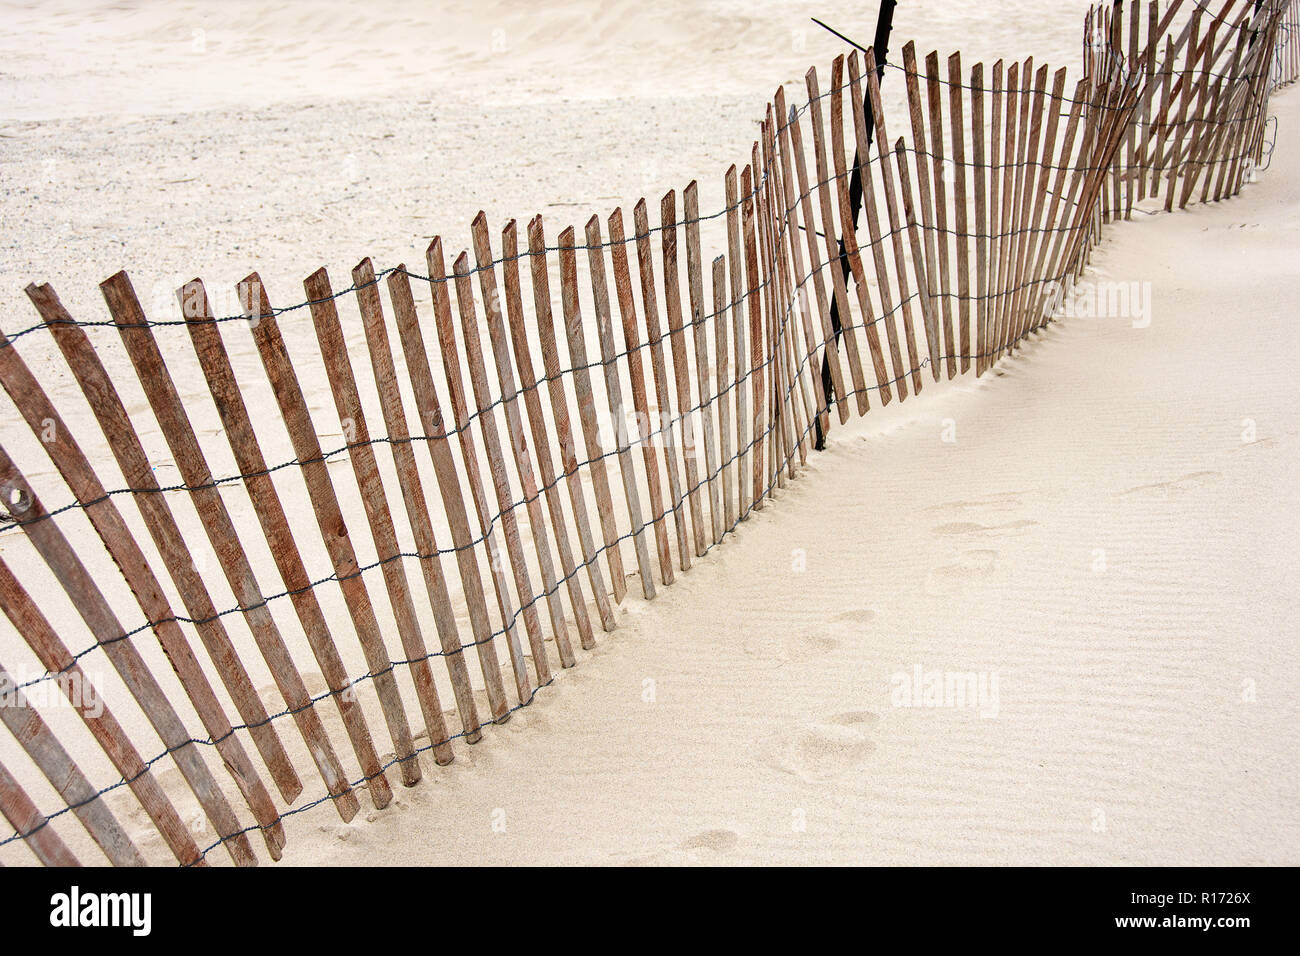 slanted weathered old wooden fence in sand on vacant beach Stock Photo